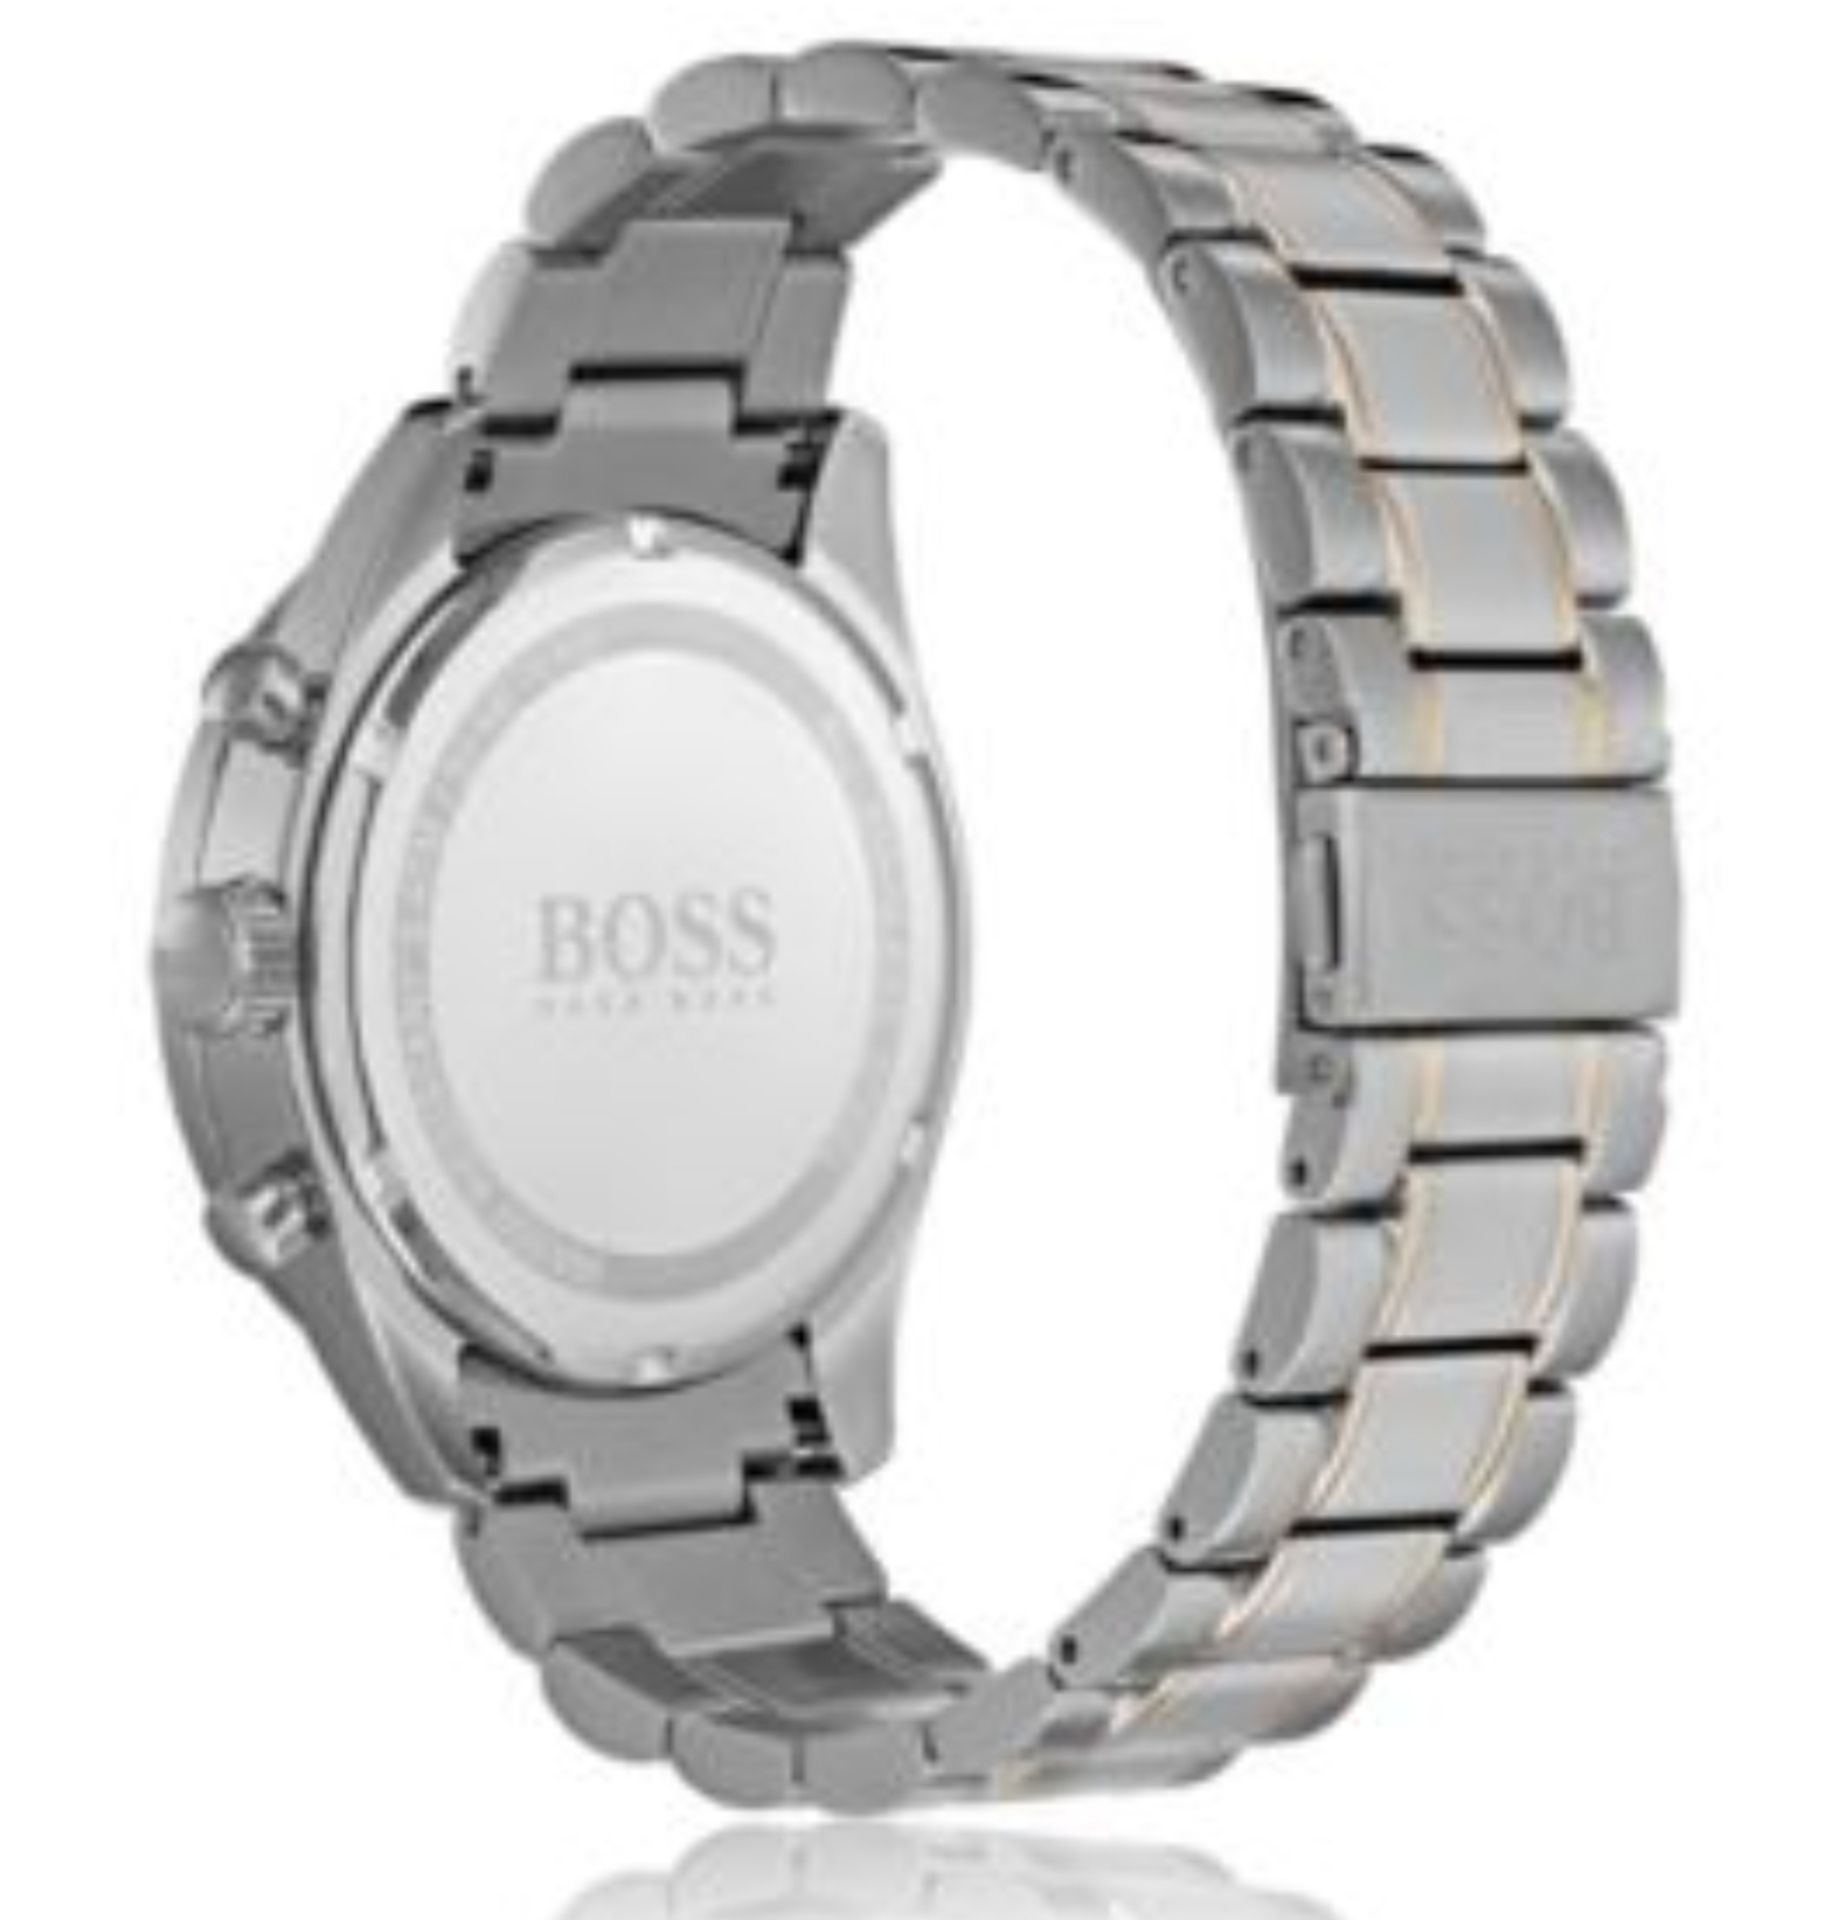 Hugo Boss 1513634 Men's Trophy Two Tone Rose Gold & Silver Chronograph Watch - Image 2 of 6